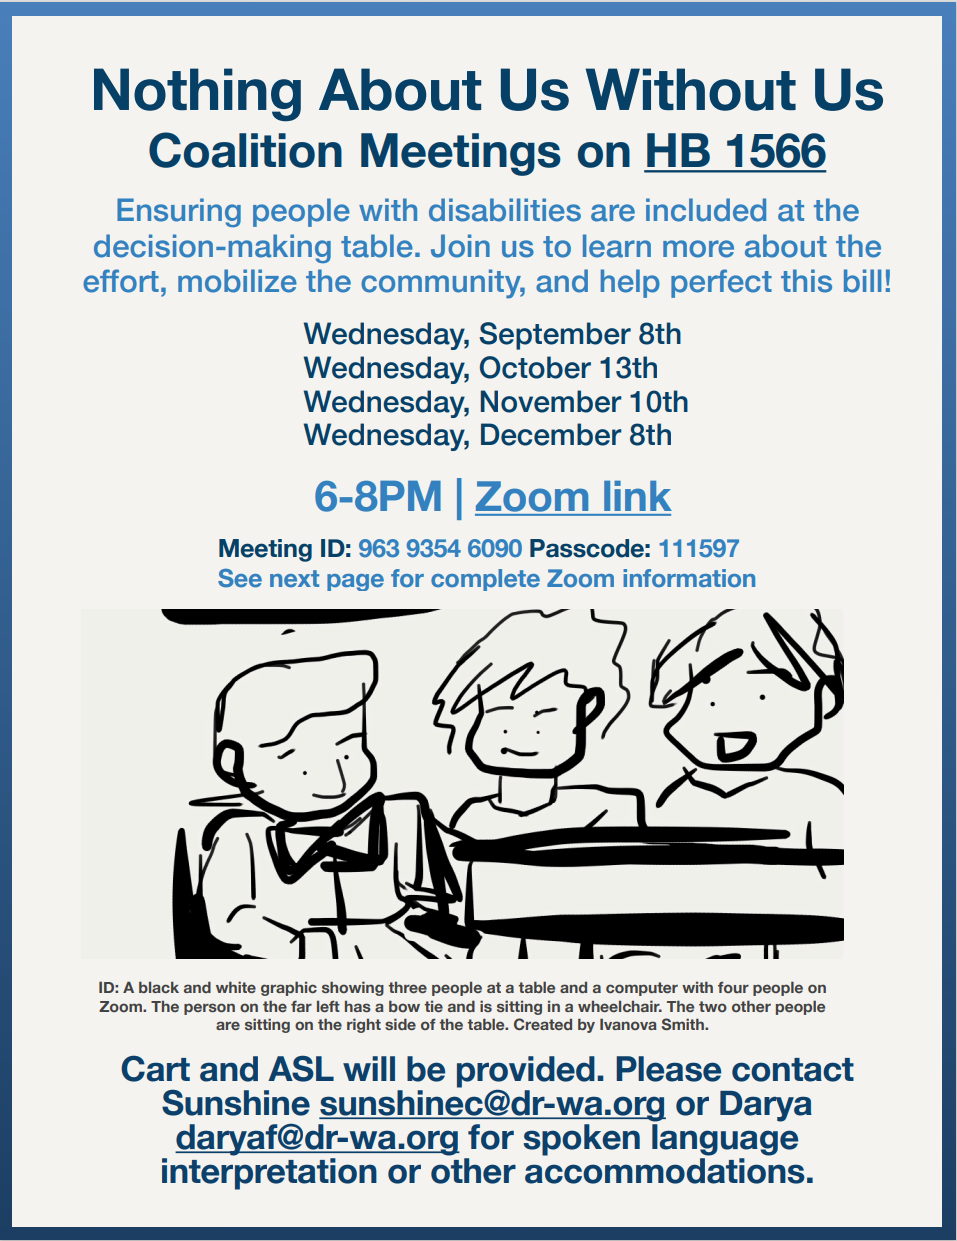 Nothing About Us Without Us Coalition Meetings Flyer